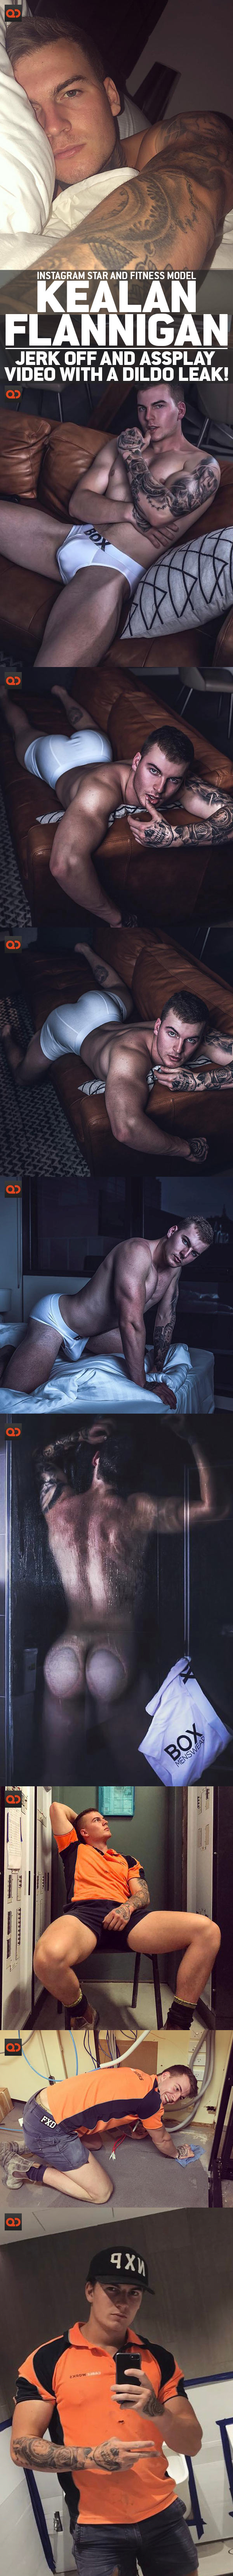 Kealan Flannigan, Instagram Star And Fitness Model, Jerk Off And Assplay Video With A Dildo Leak!